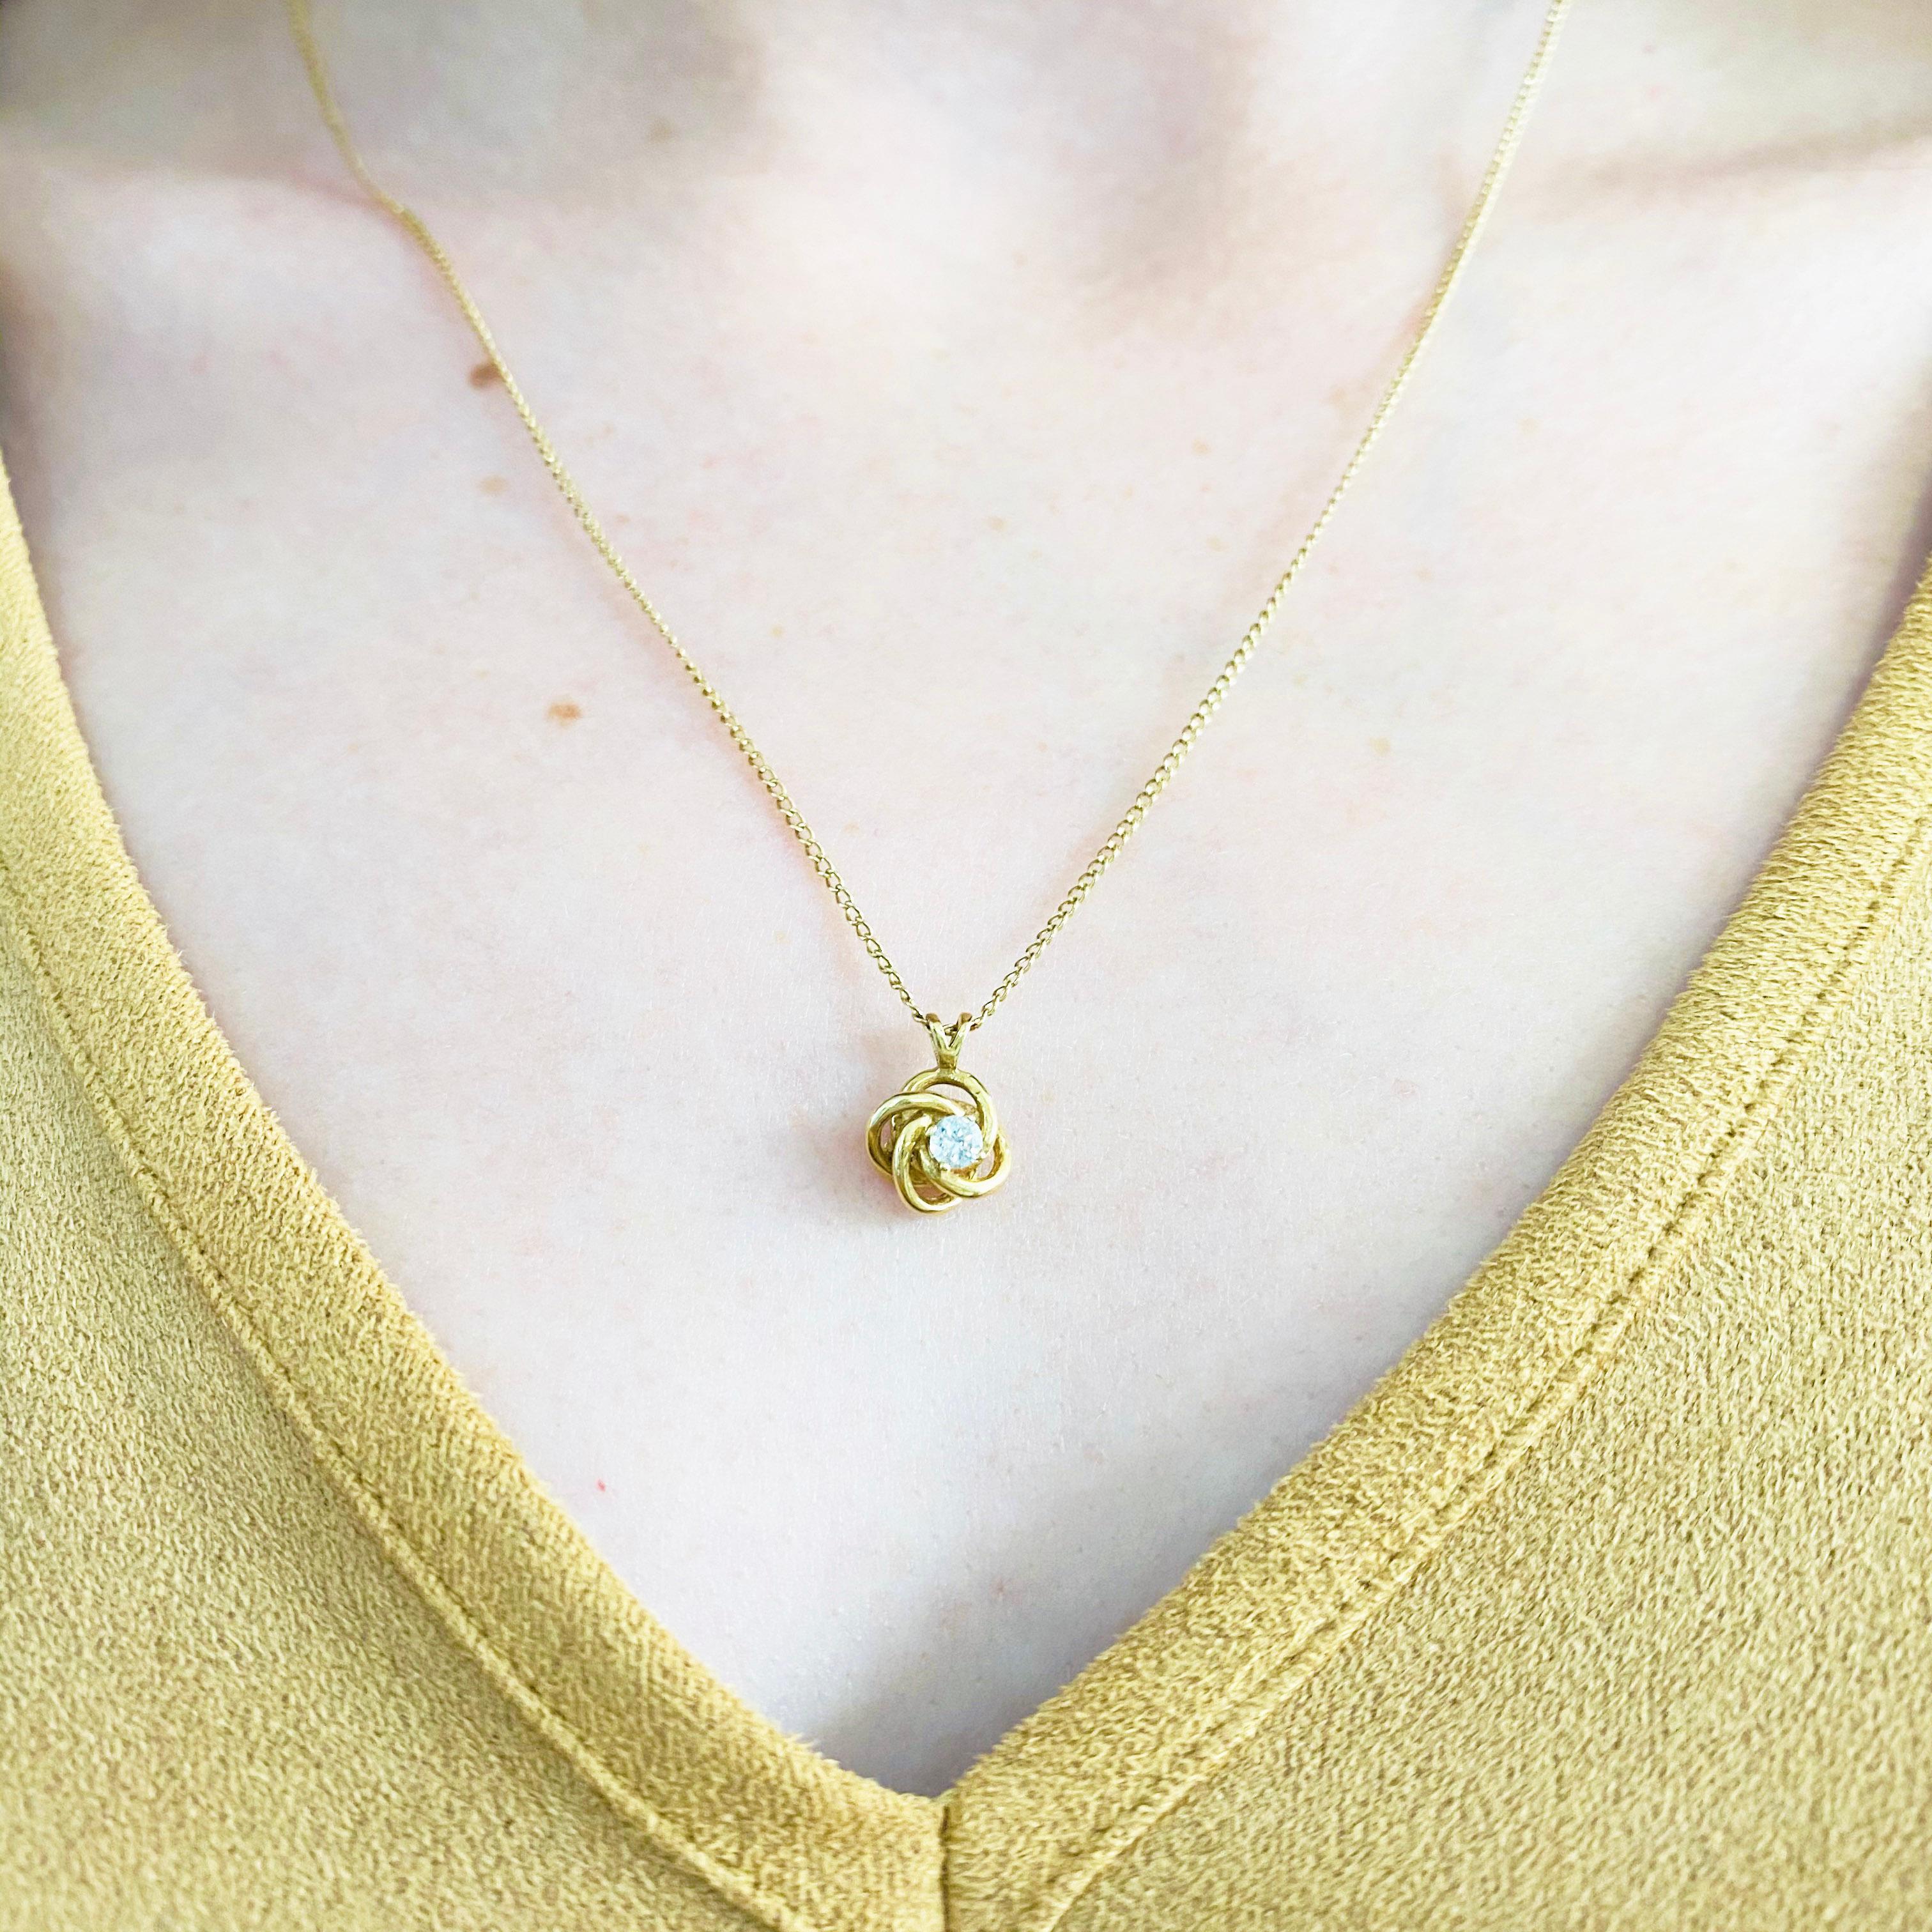 LOVE KNOT NECKLACE:  This gorgeous 14k yellow gold love knot pendant encircling a brilliant white diamond is the perfect mix between classic and trendy! The lover’s knot or love knot has a long history of being a symbol of love. It represents the